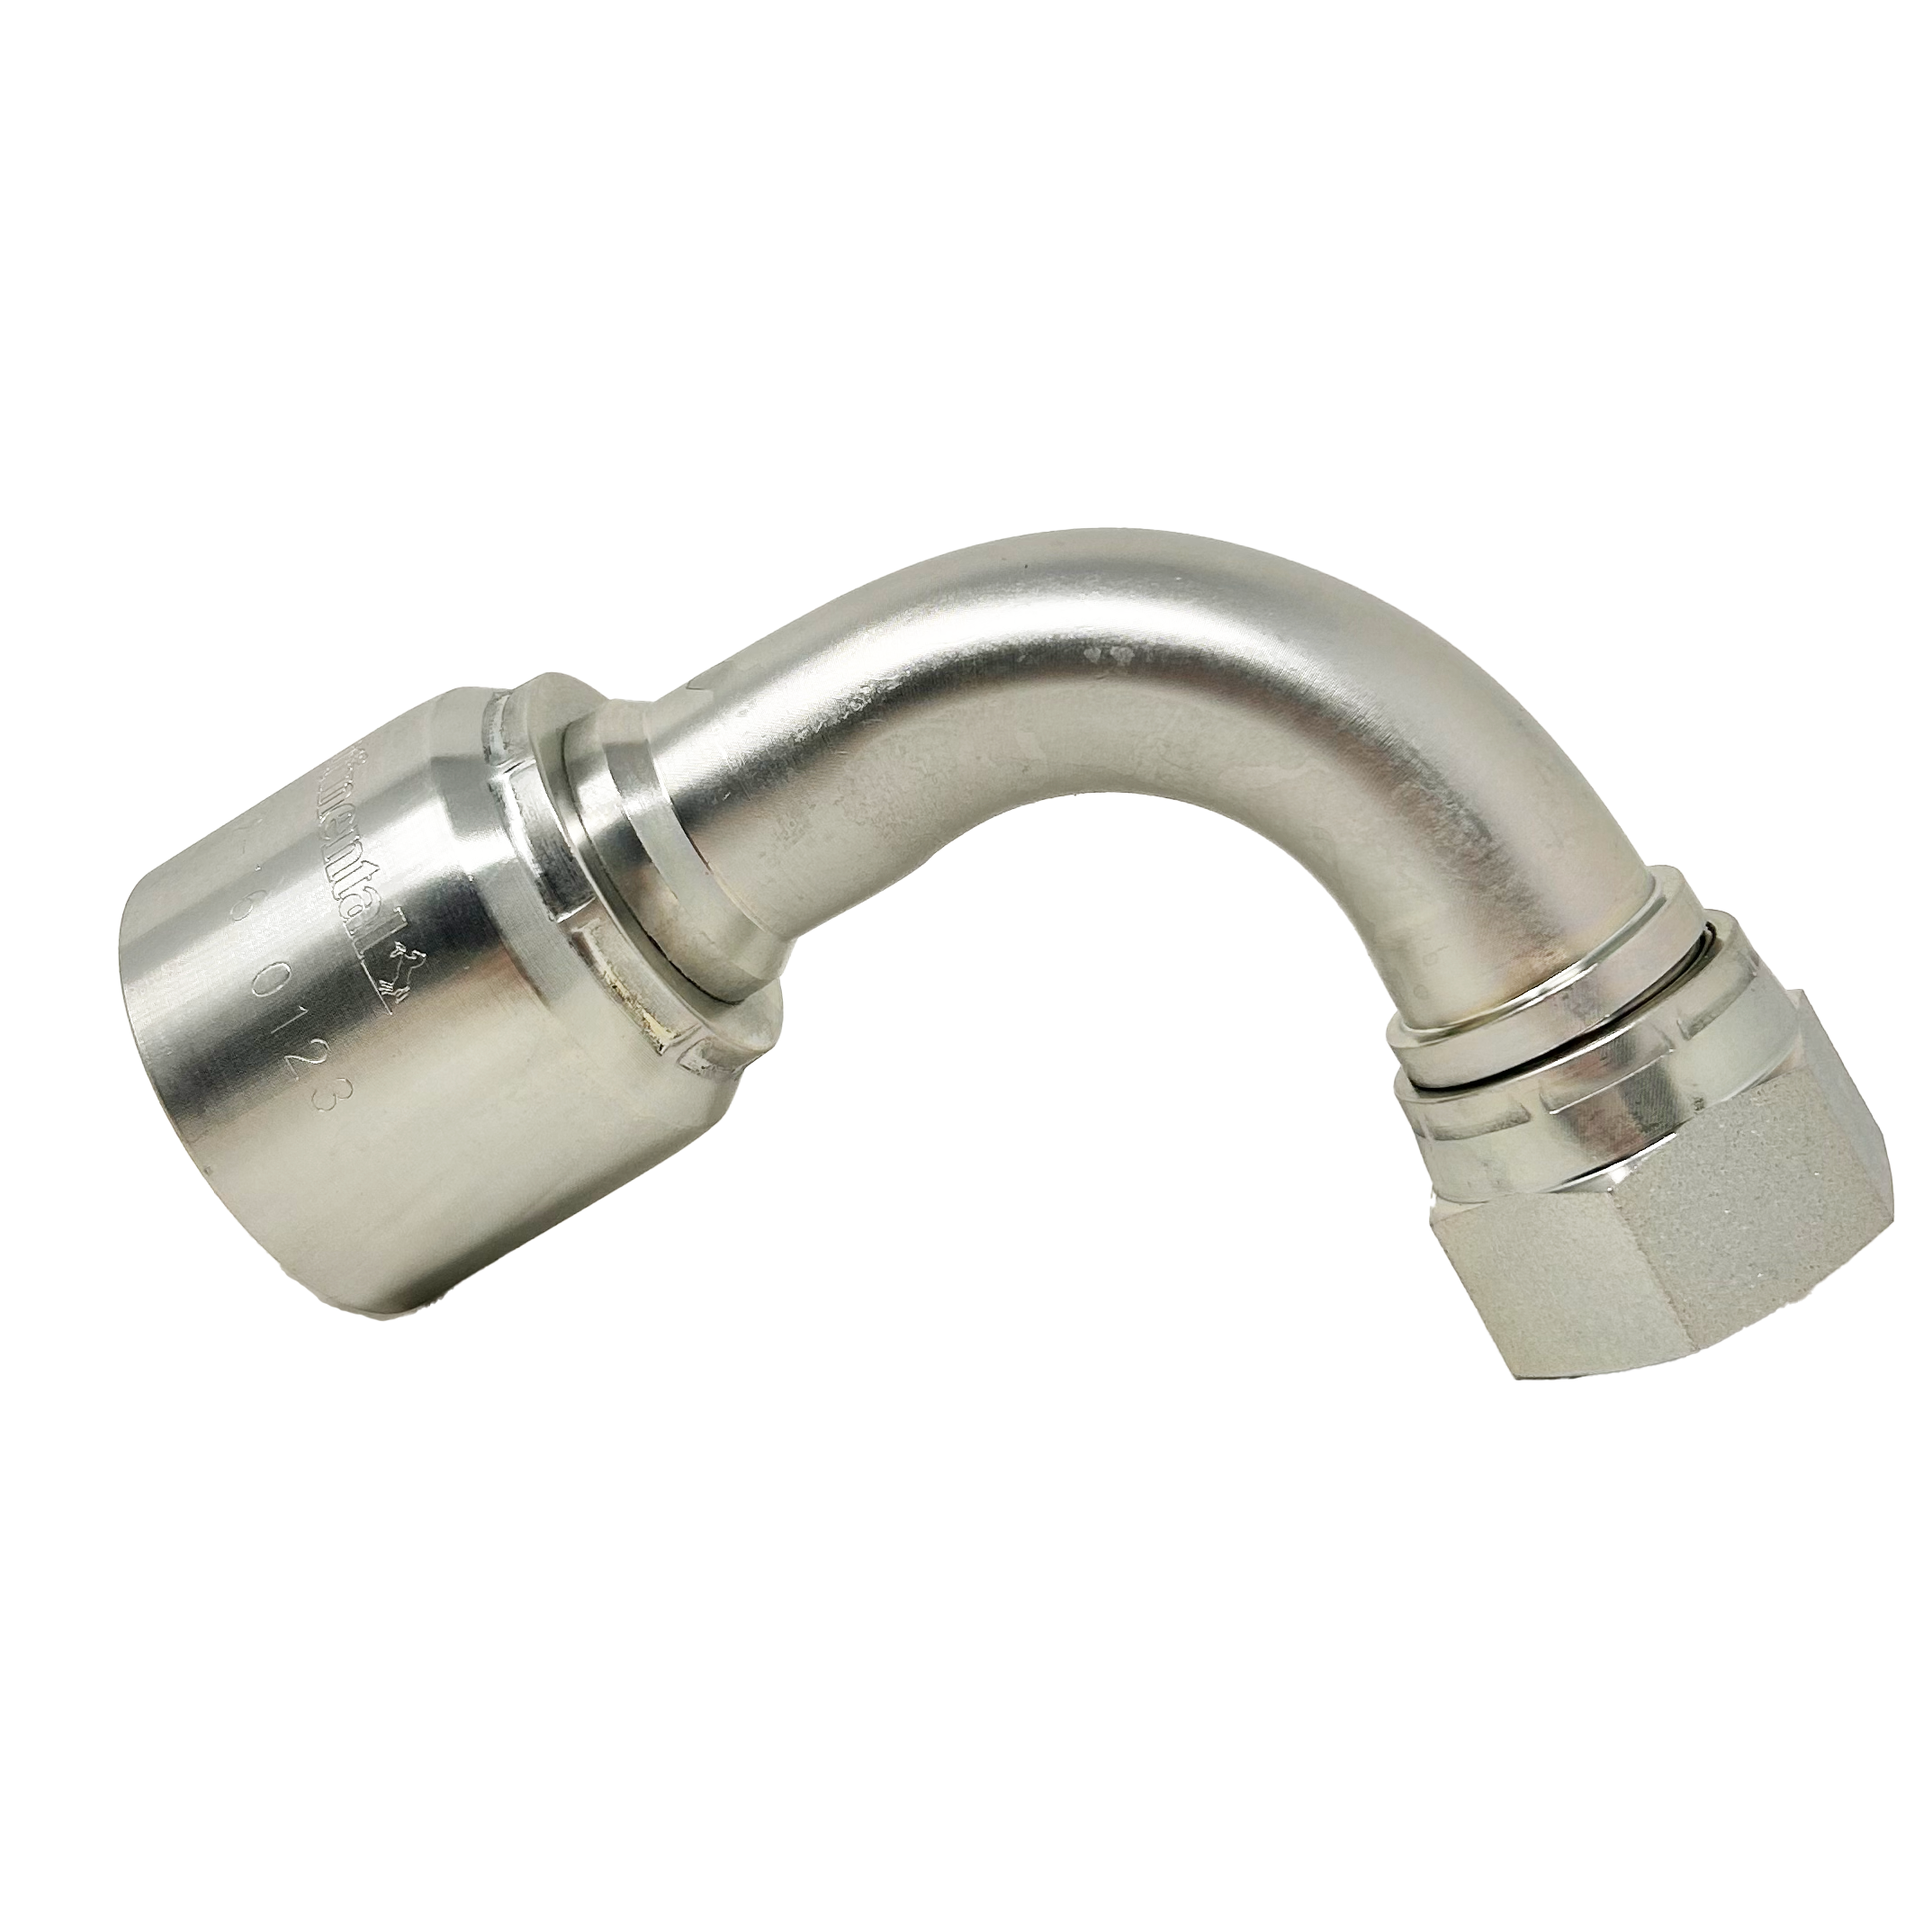 B2-JCFX90-1010S: Continental Hose Fitting, 0.625 (5/8") Hose ID x 7/8-14 Female JIC, 90-Degree Swivel Connection